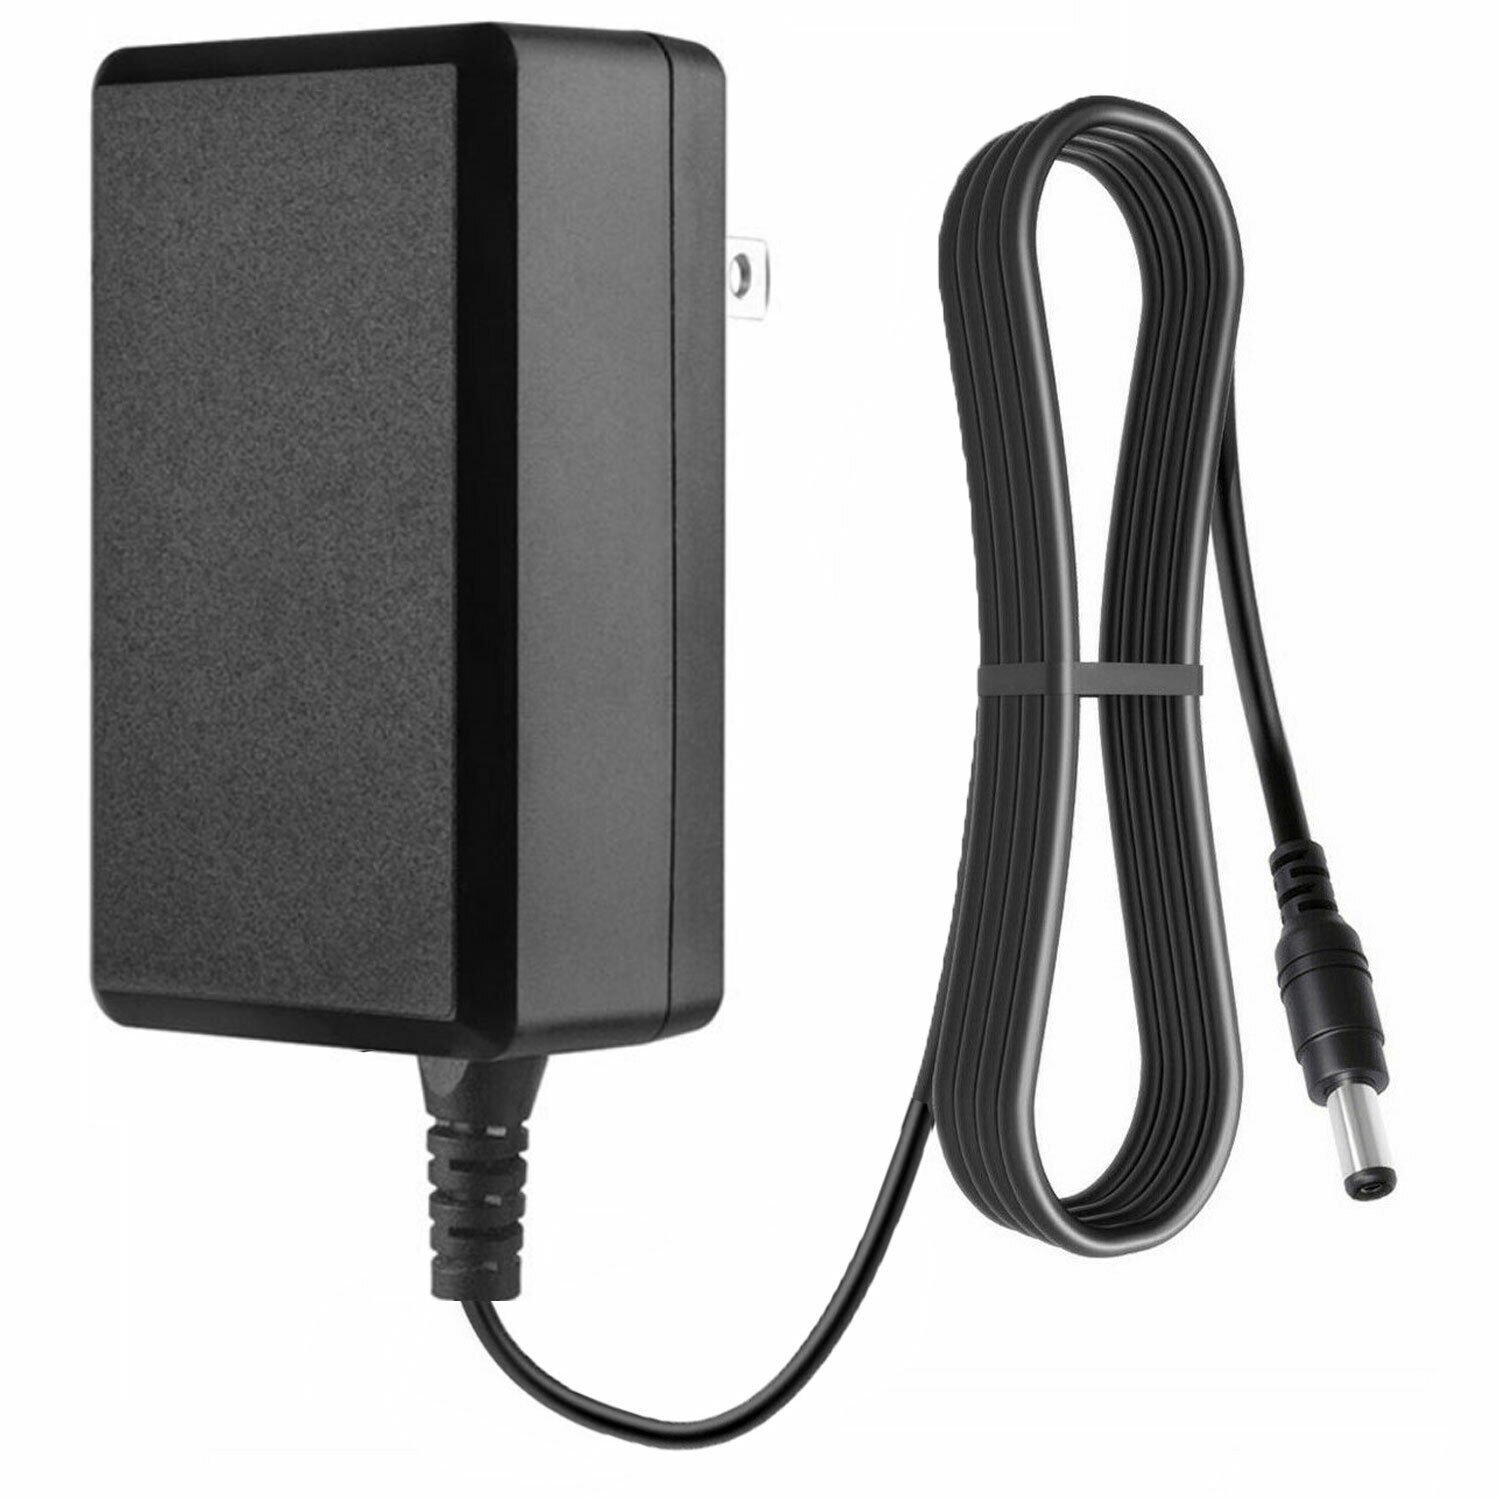 USB Charger Power Adapter for Sony SRS-BTS50 SRS-XB41 SRSXB41 Wireless Speaker Package includes: 1x USB charger 1x